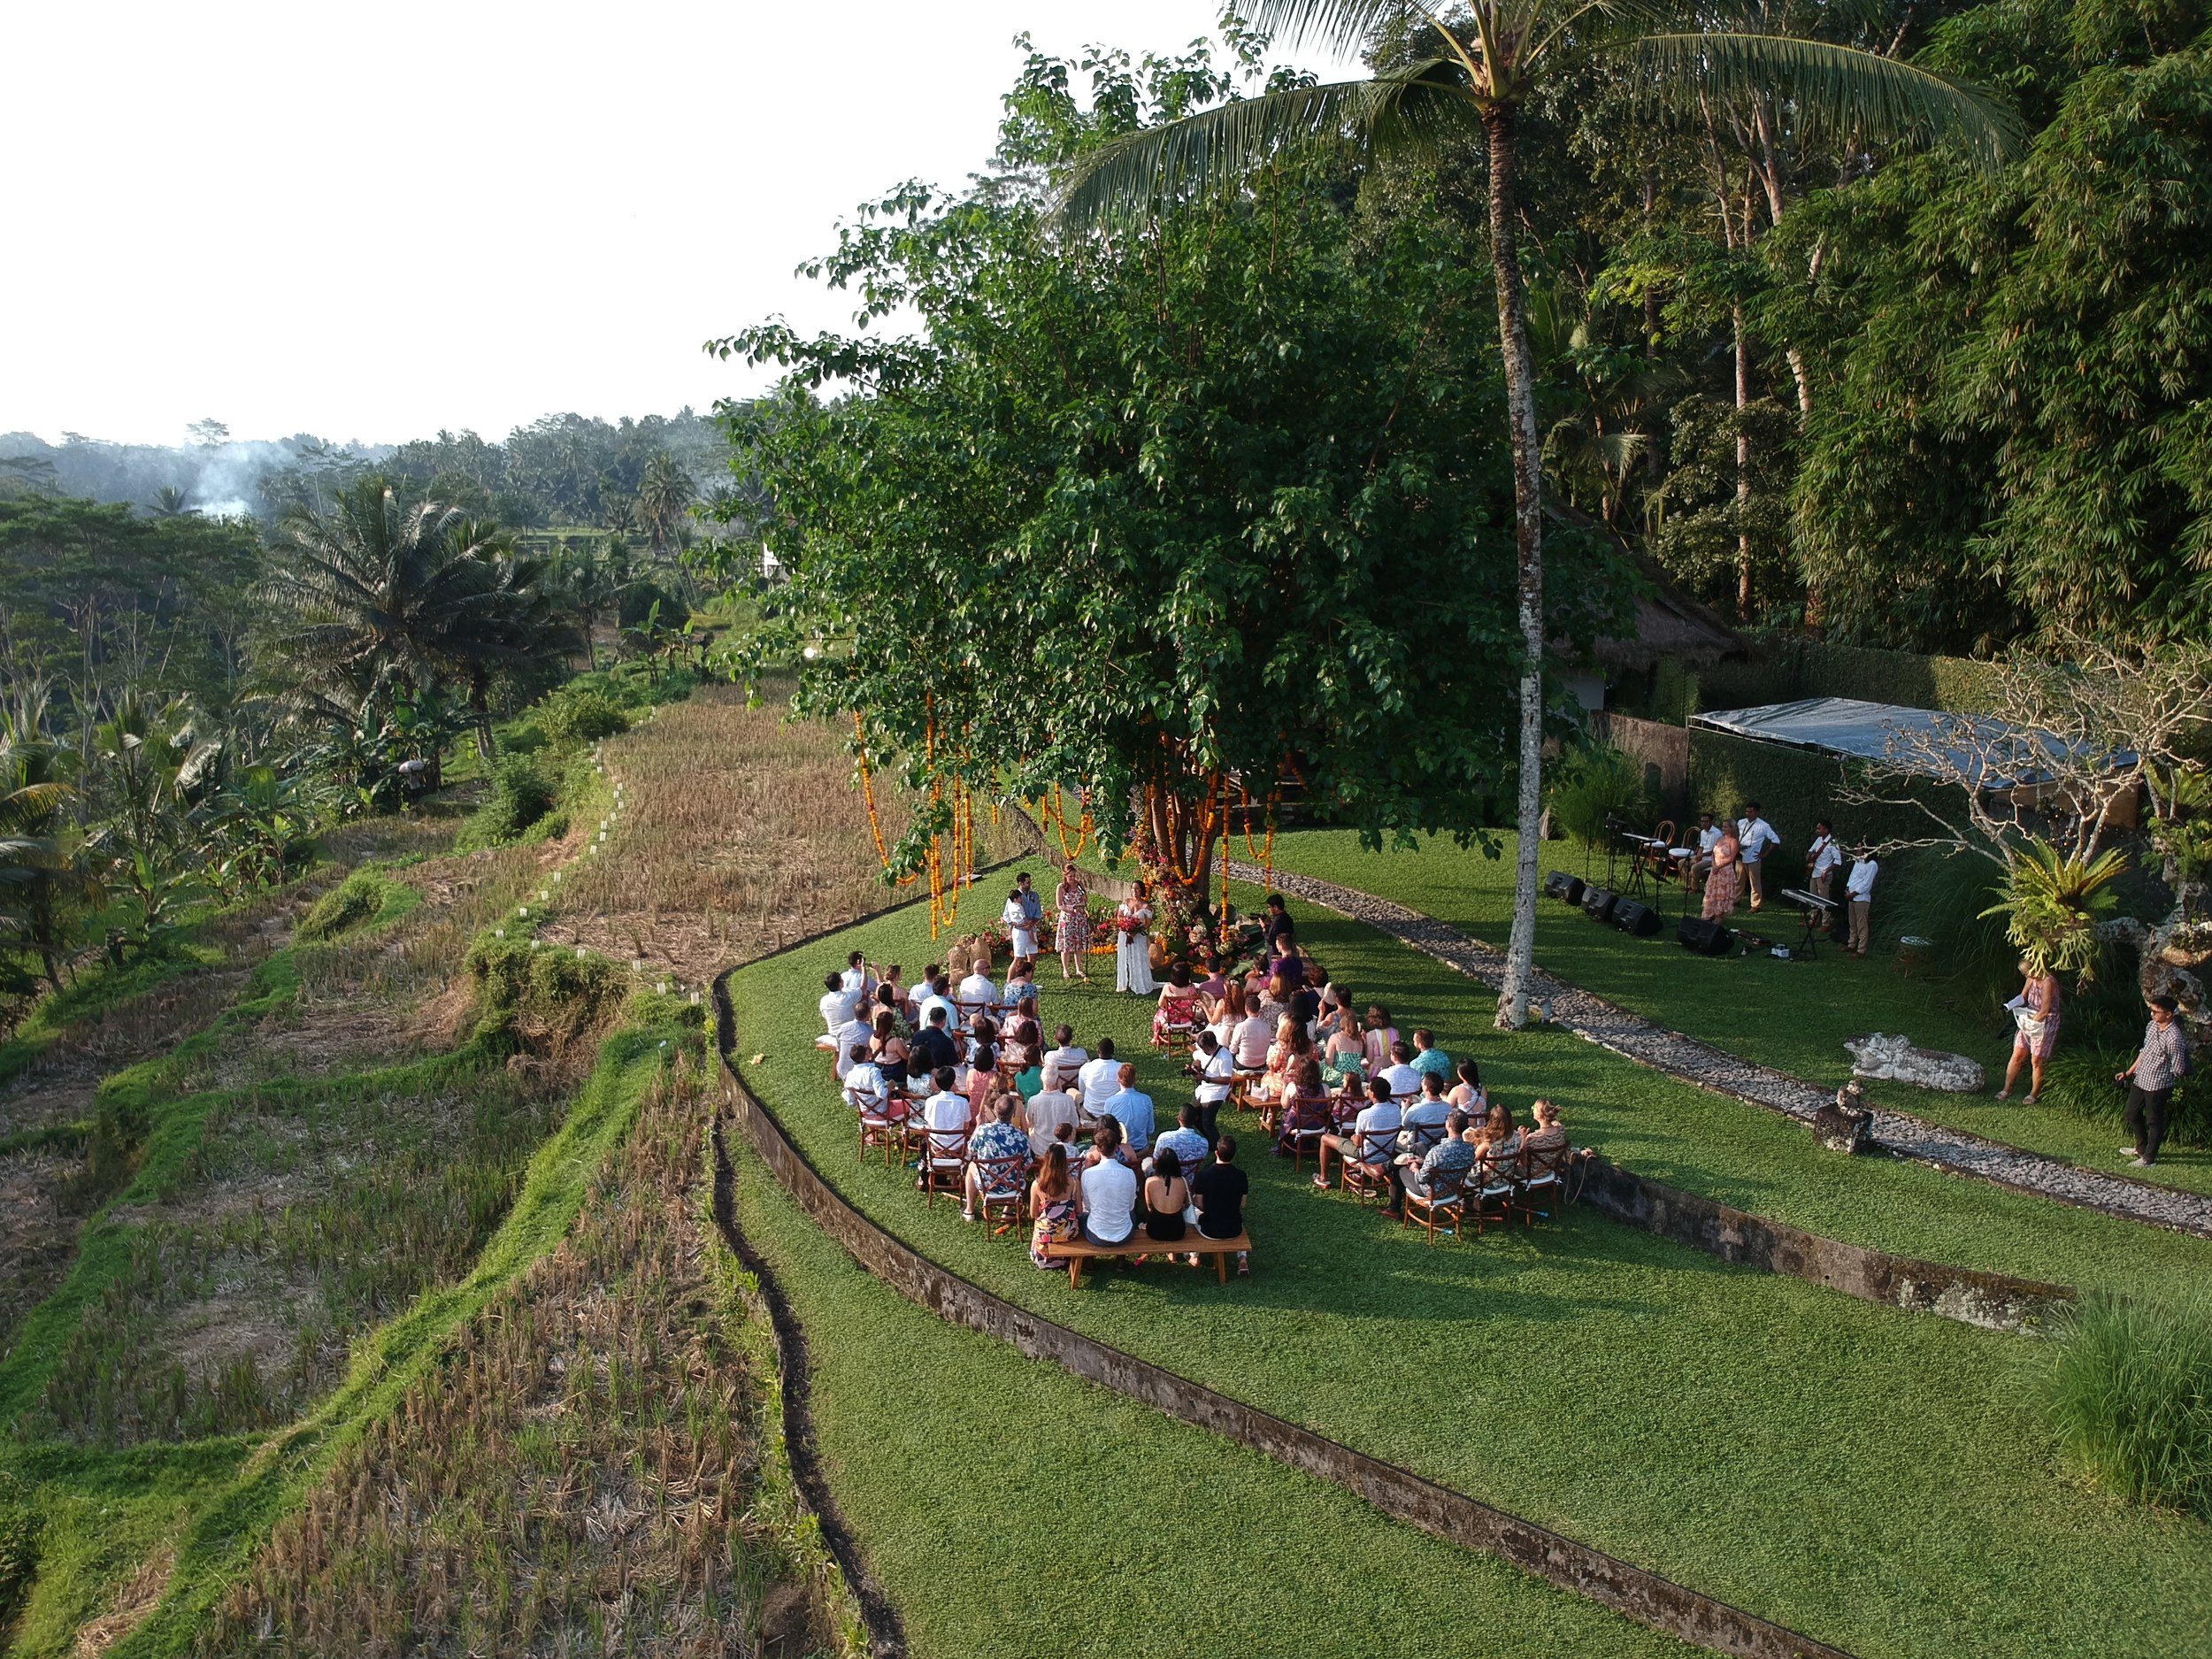 Nestled in Rice Fields, Image from A Tent in Bali